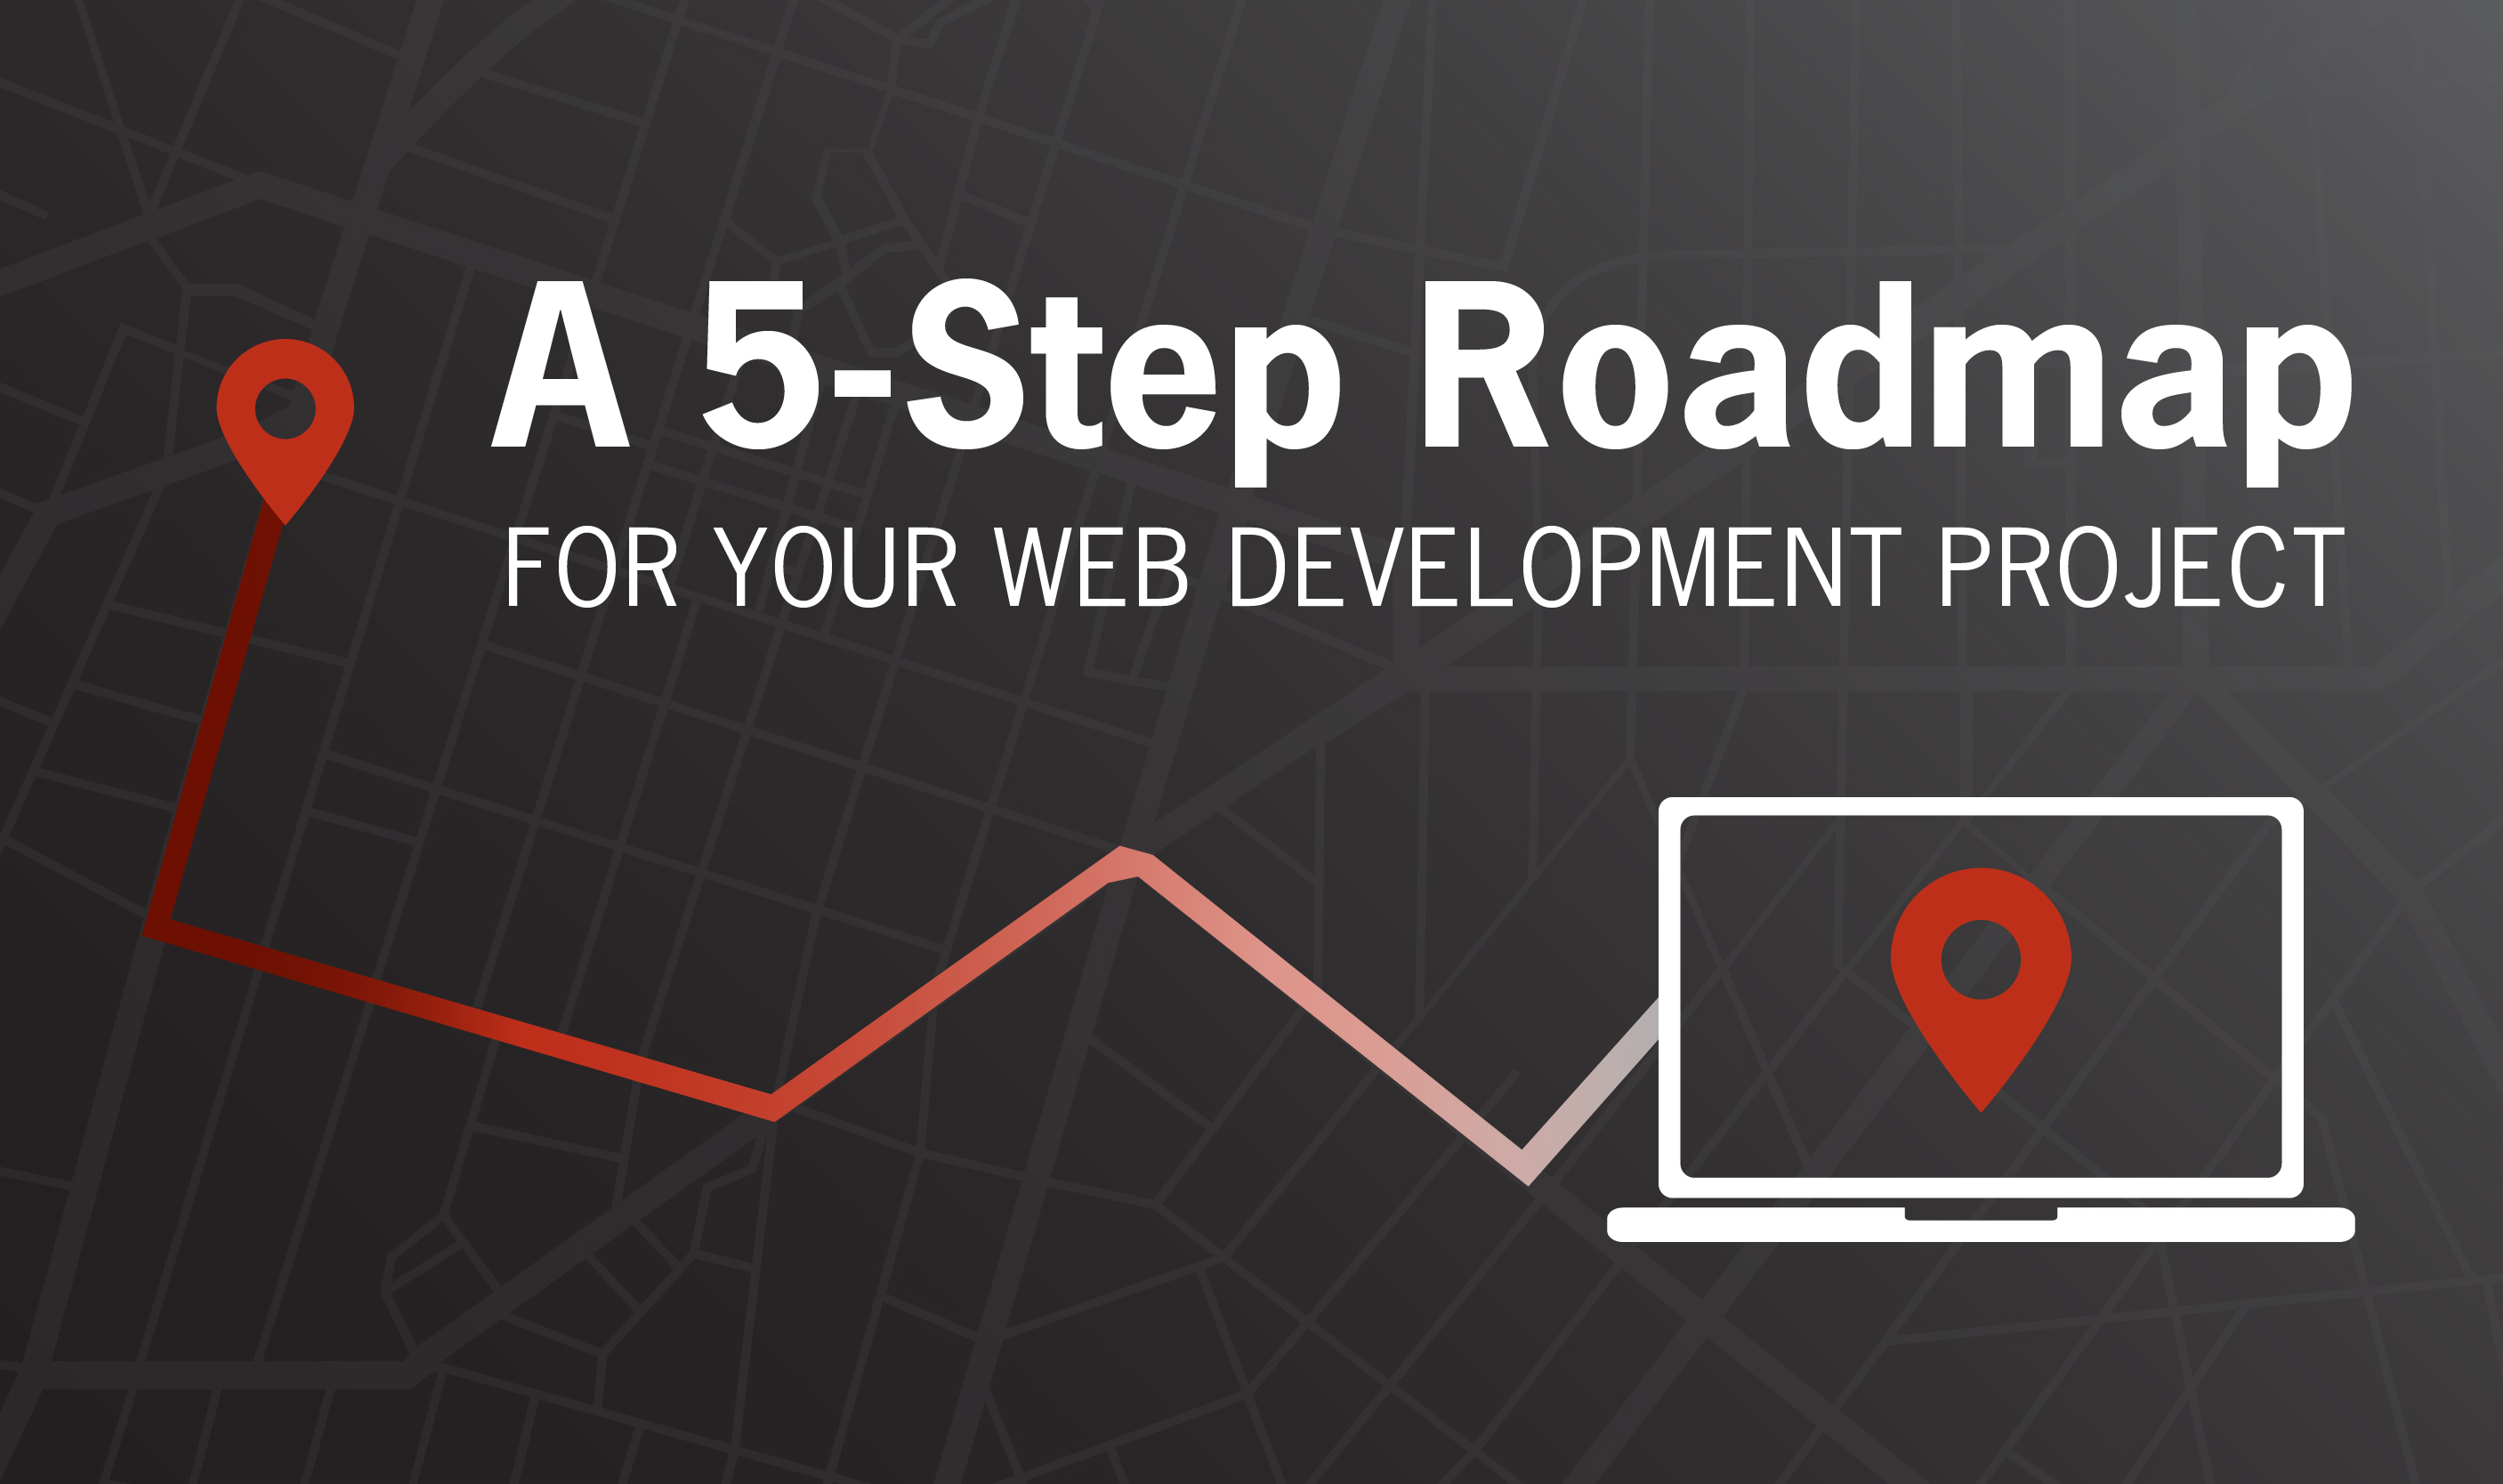 a 5-step roadmap for your web development project